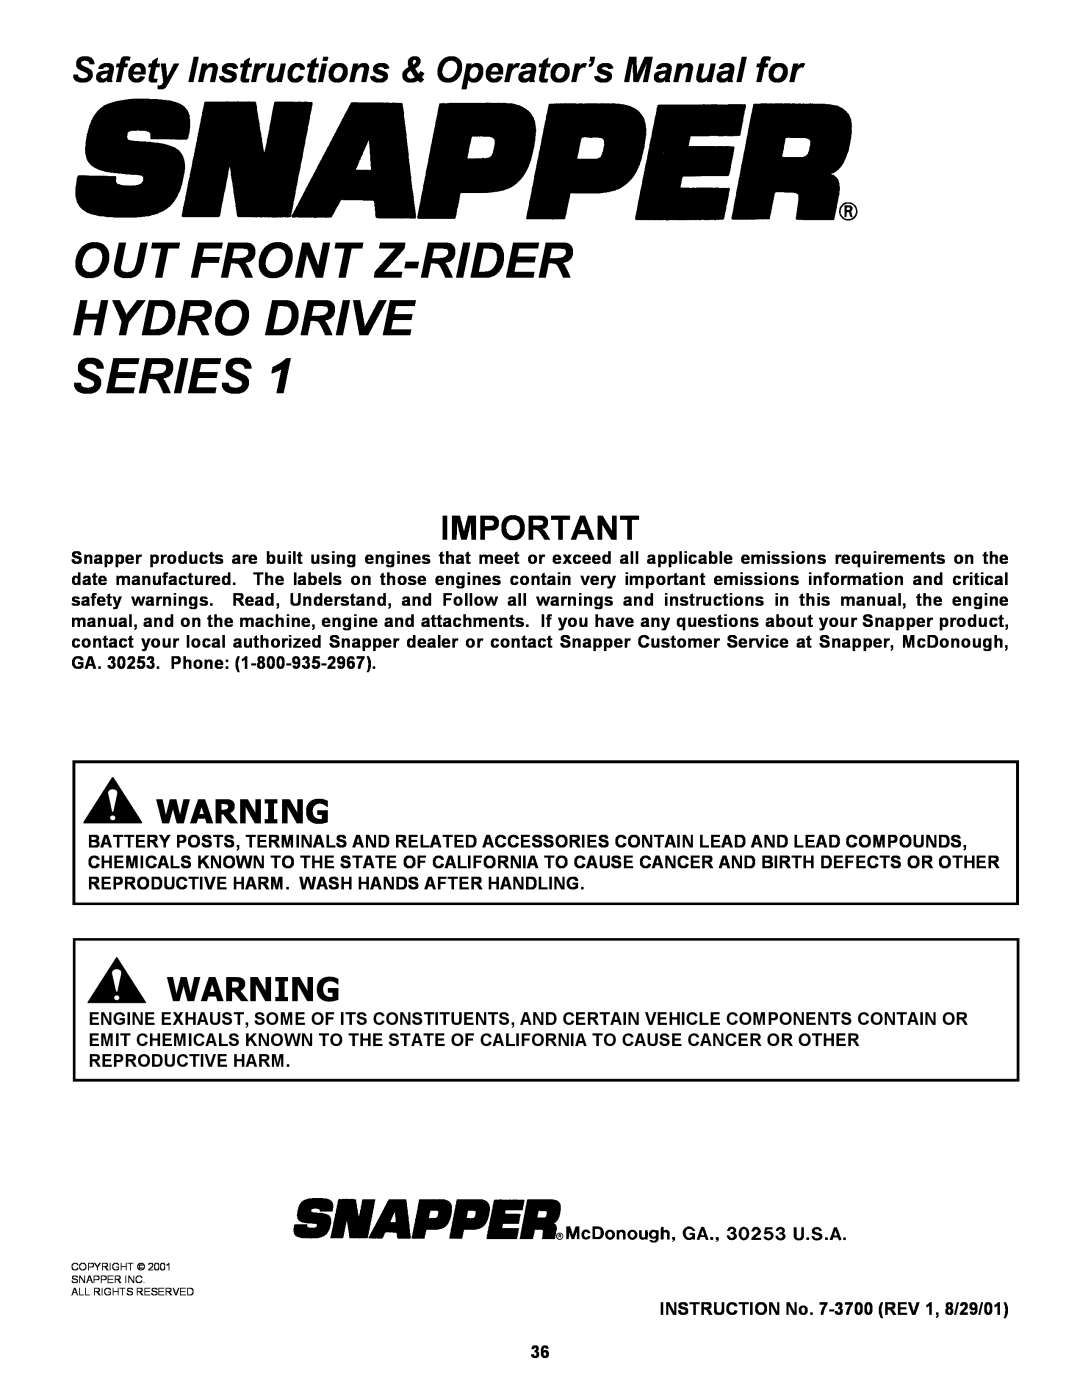 Snapper ZF5201M, ZF6101M, ZF2101DKU Out Front Z-Rider Hydro Drive Series, Safety Instructions & Operator’s Manual for 